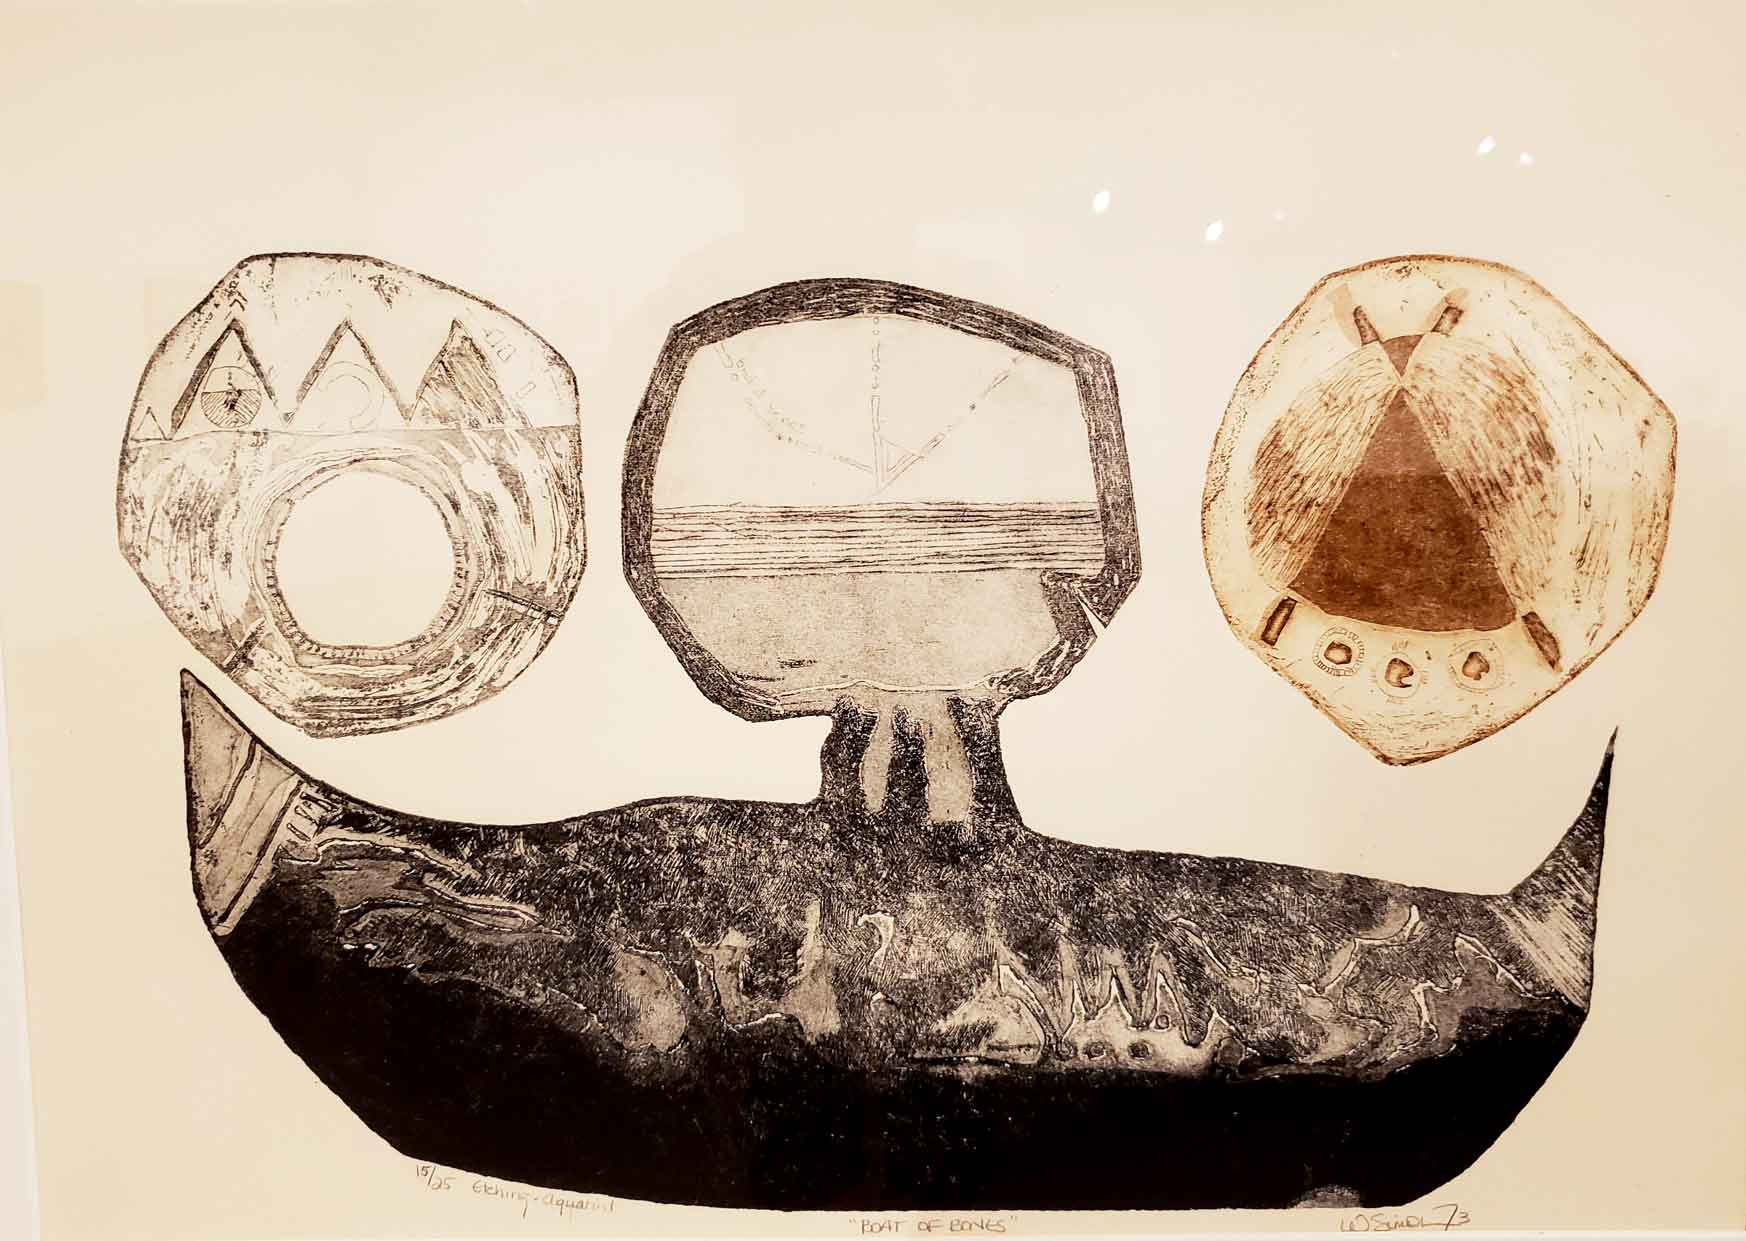 Boat of Bones, etching by Wilma Simon shown at Drawn to the West